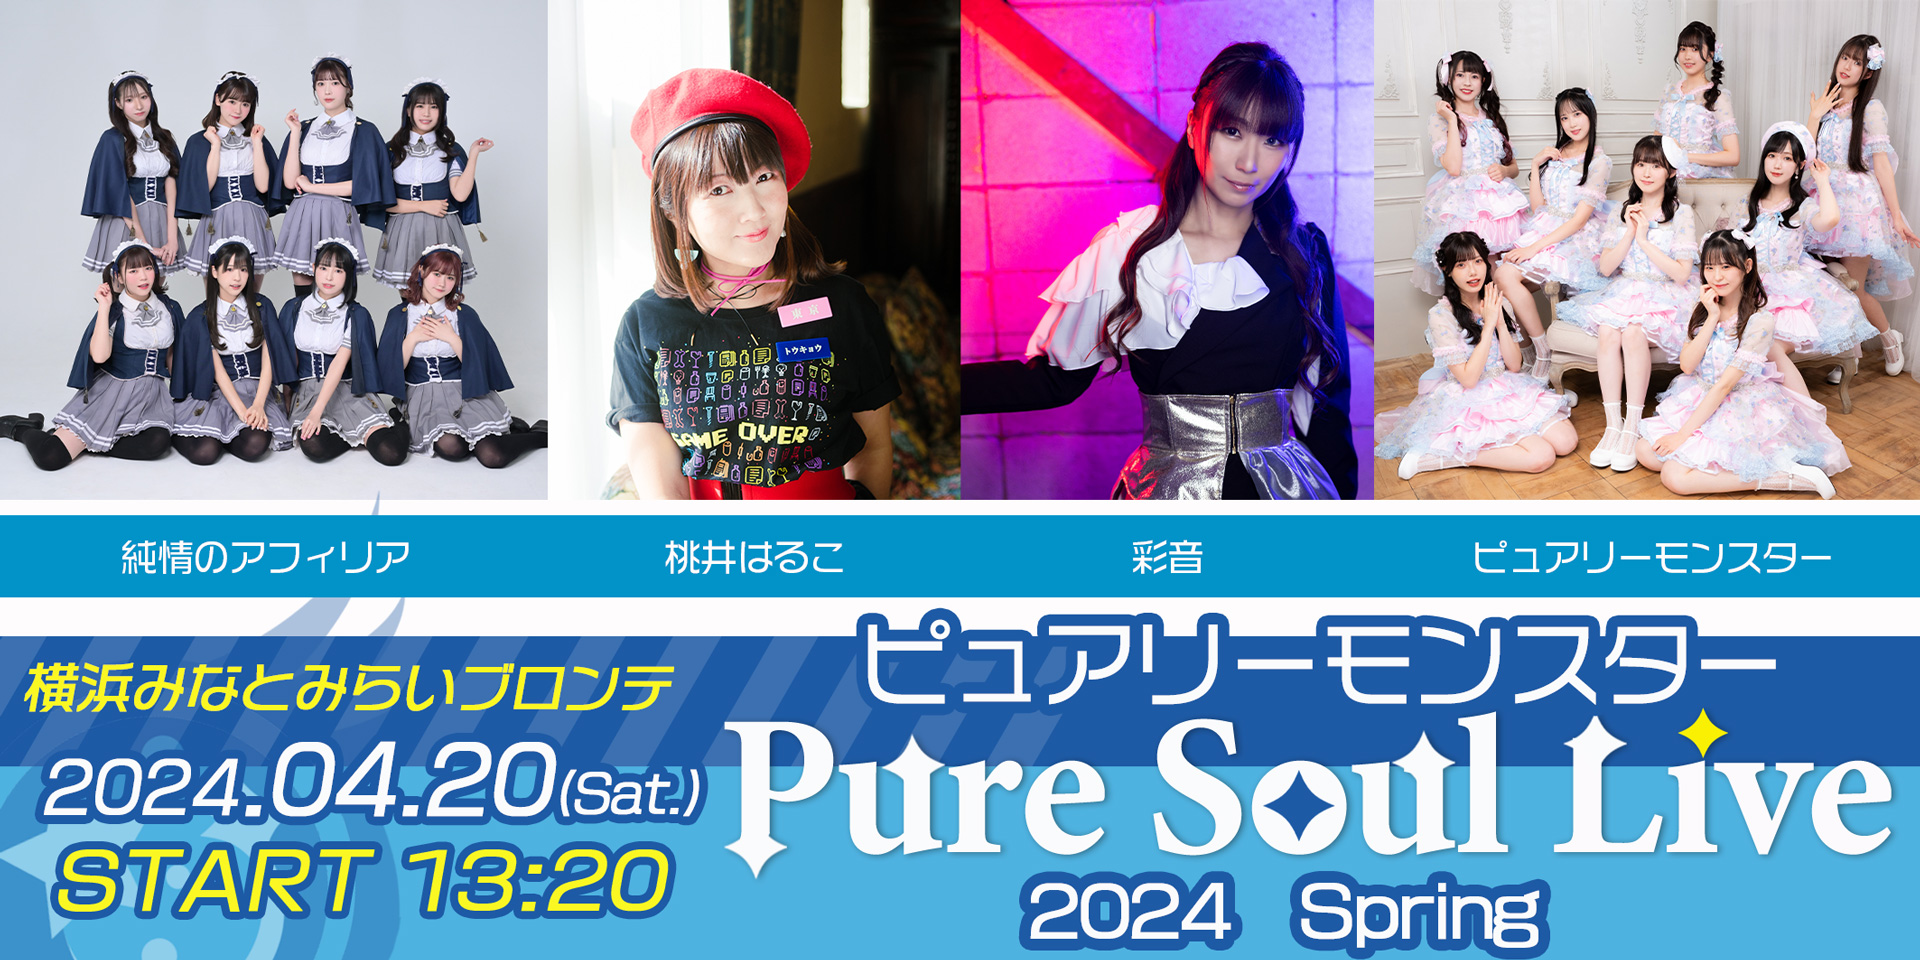 Pure Soul Live 2024 Spring